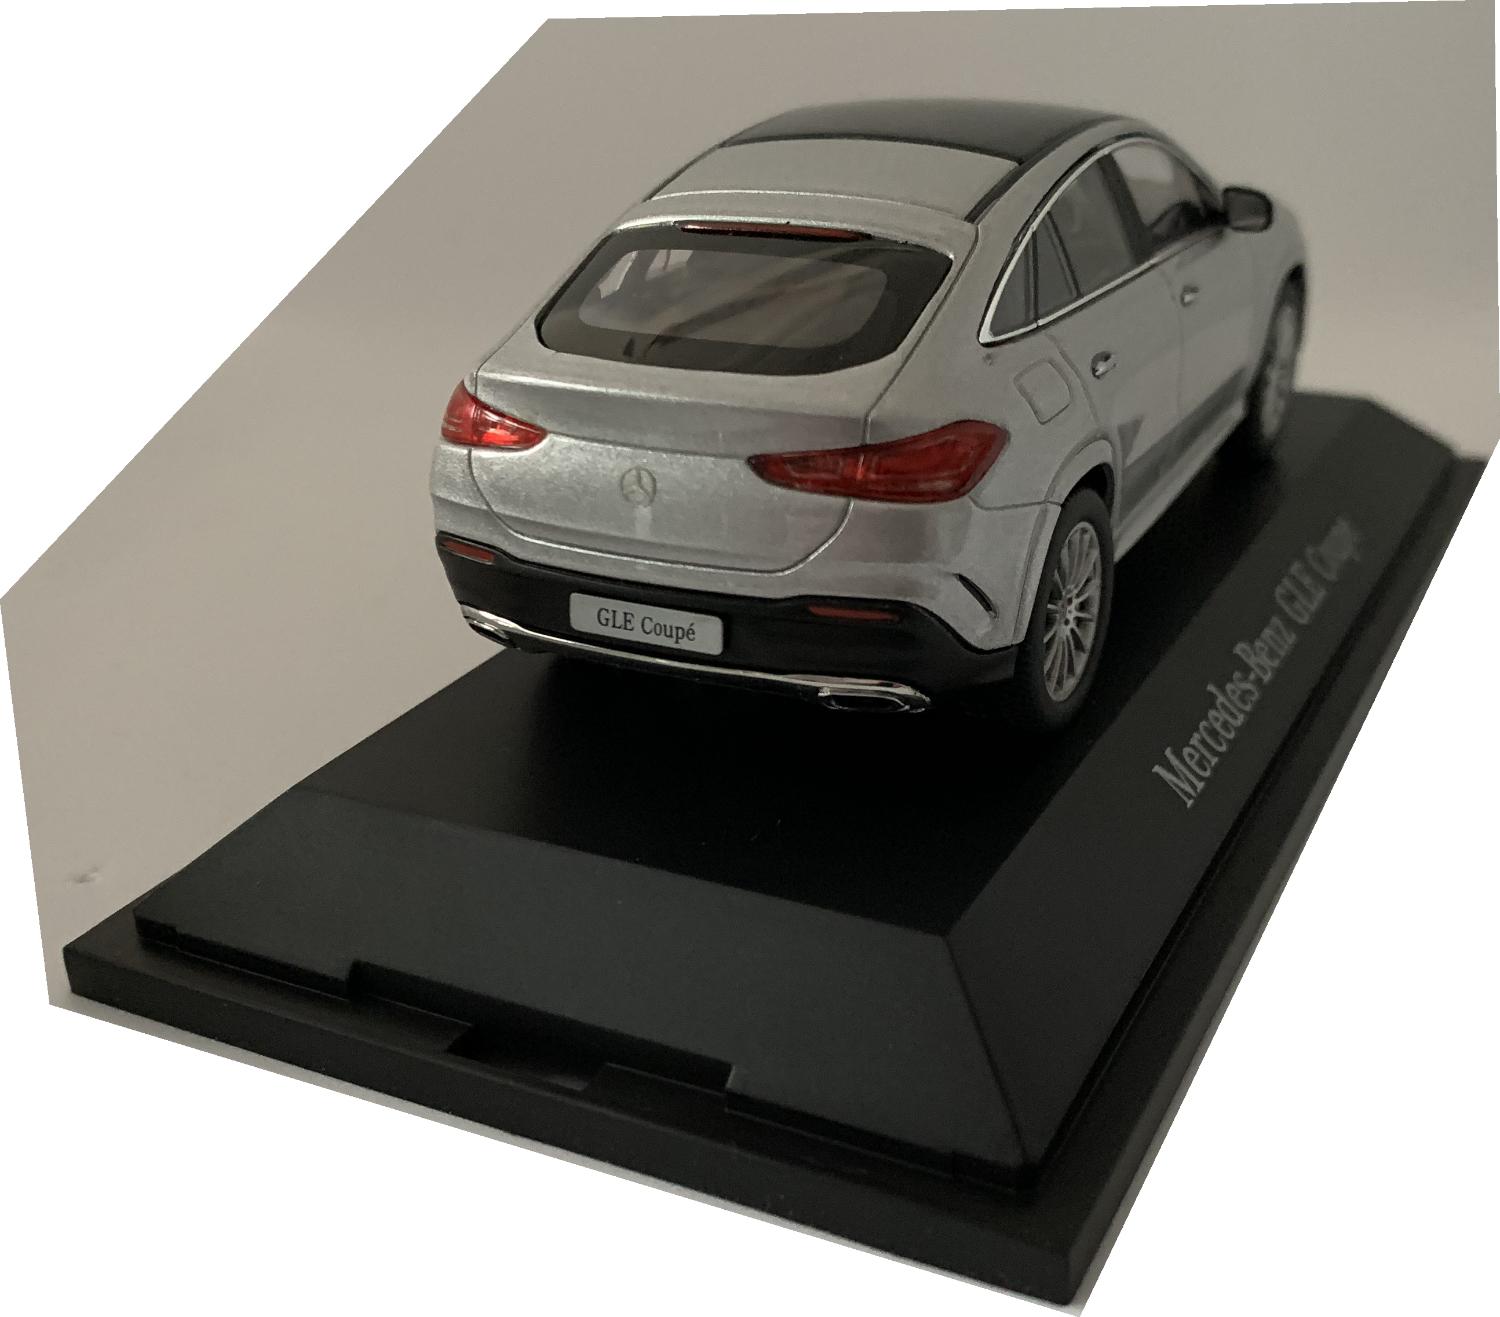 Mercedes Benz GLE Coupe (167) Coupe 2020 in silver 1:43 scale model from iScale